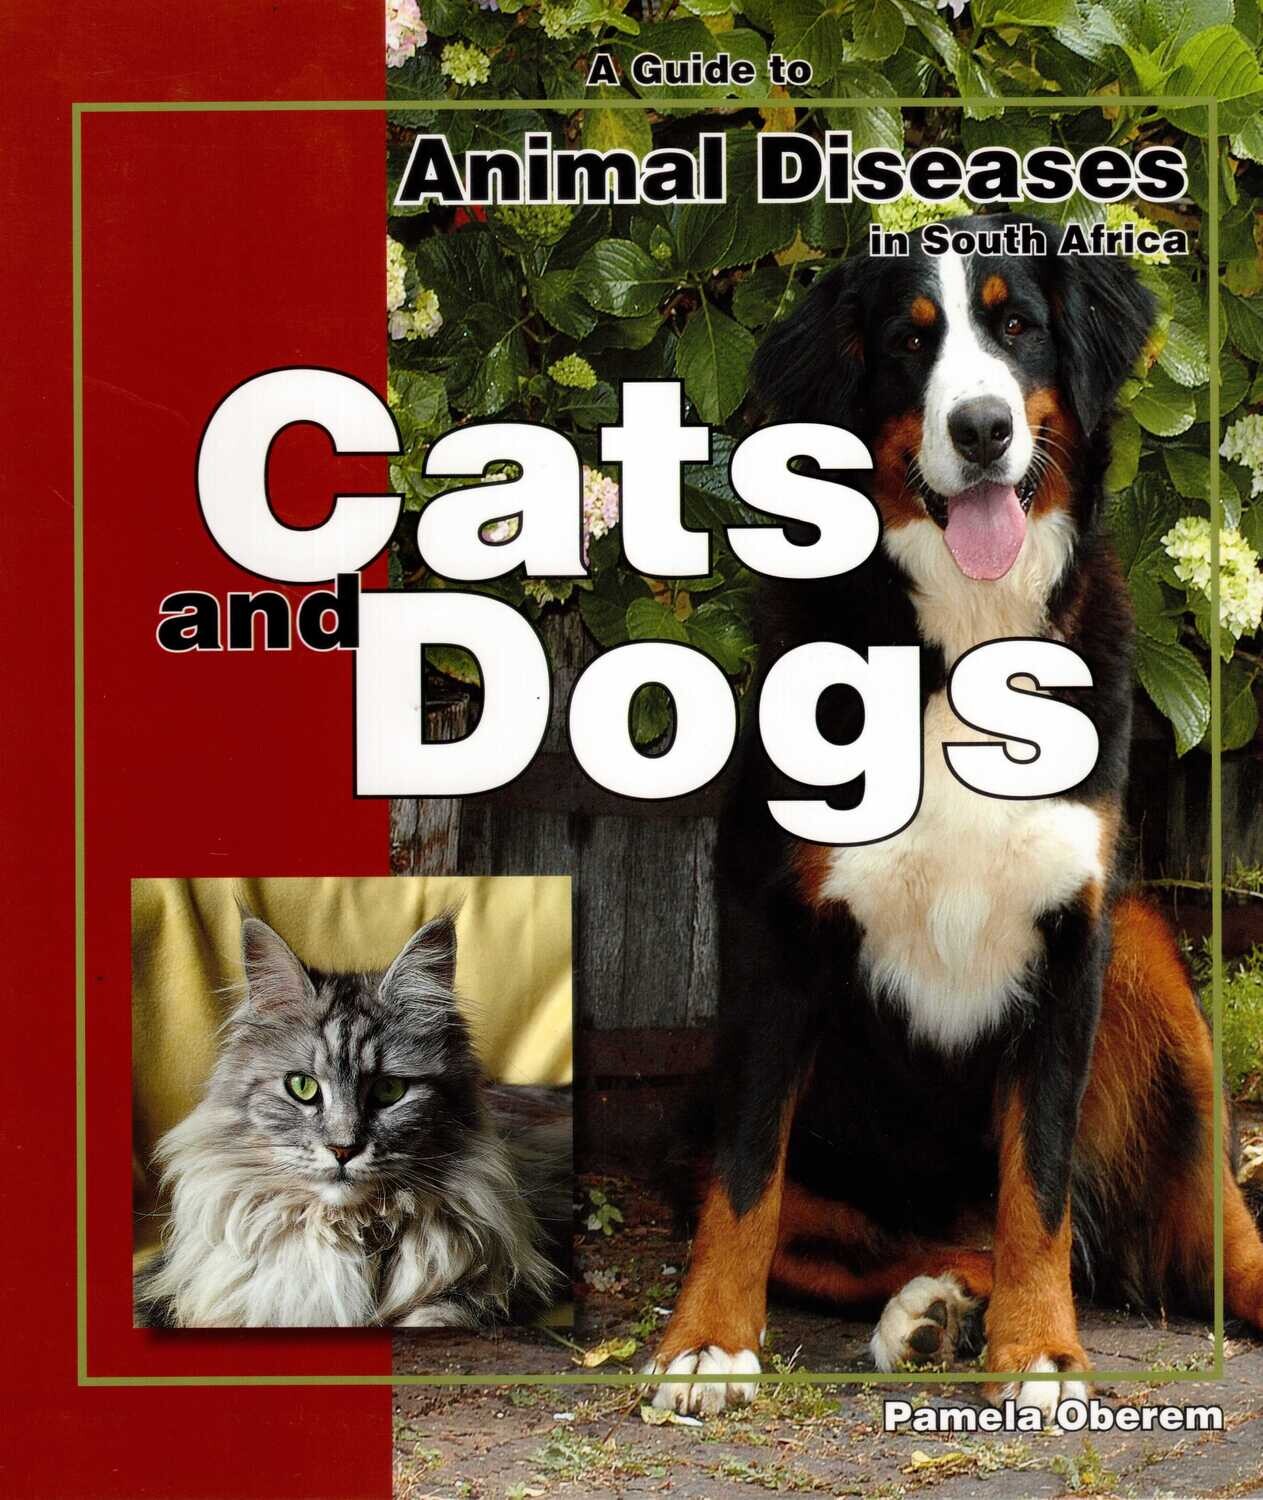 Animal Diseases of Cats and Dogs